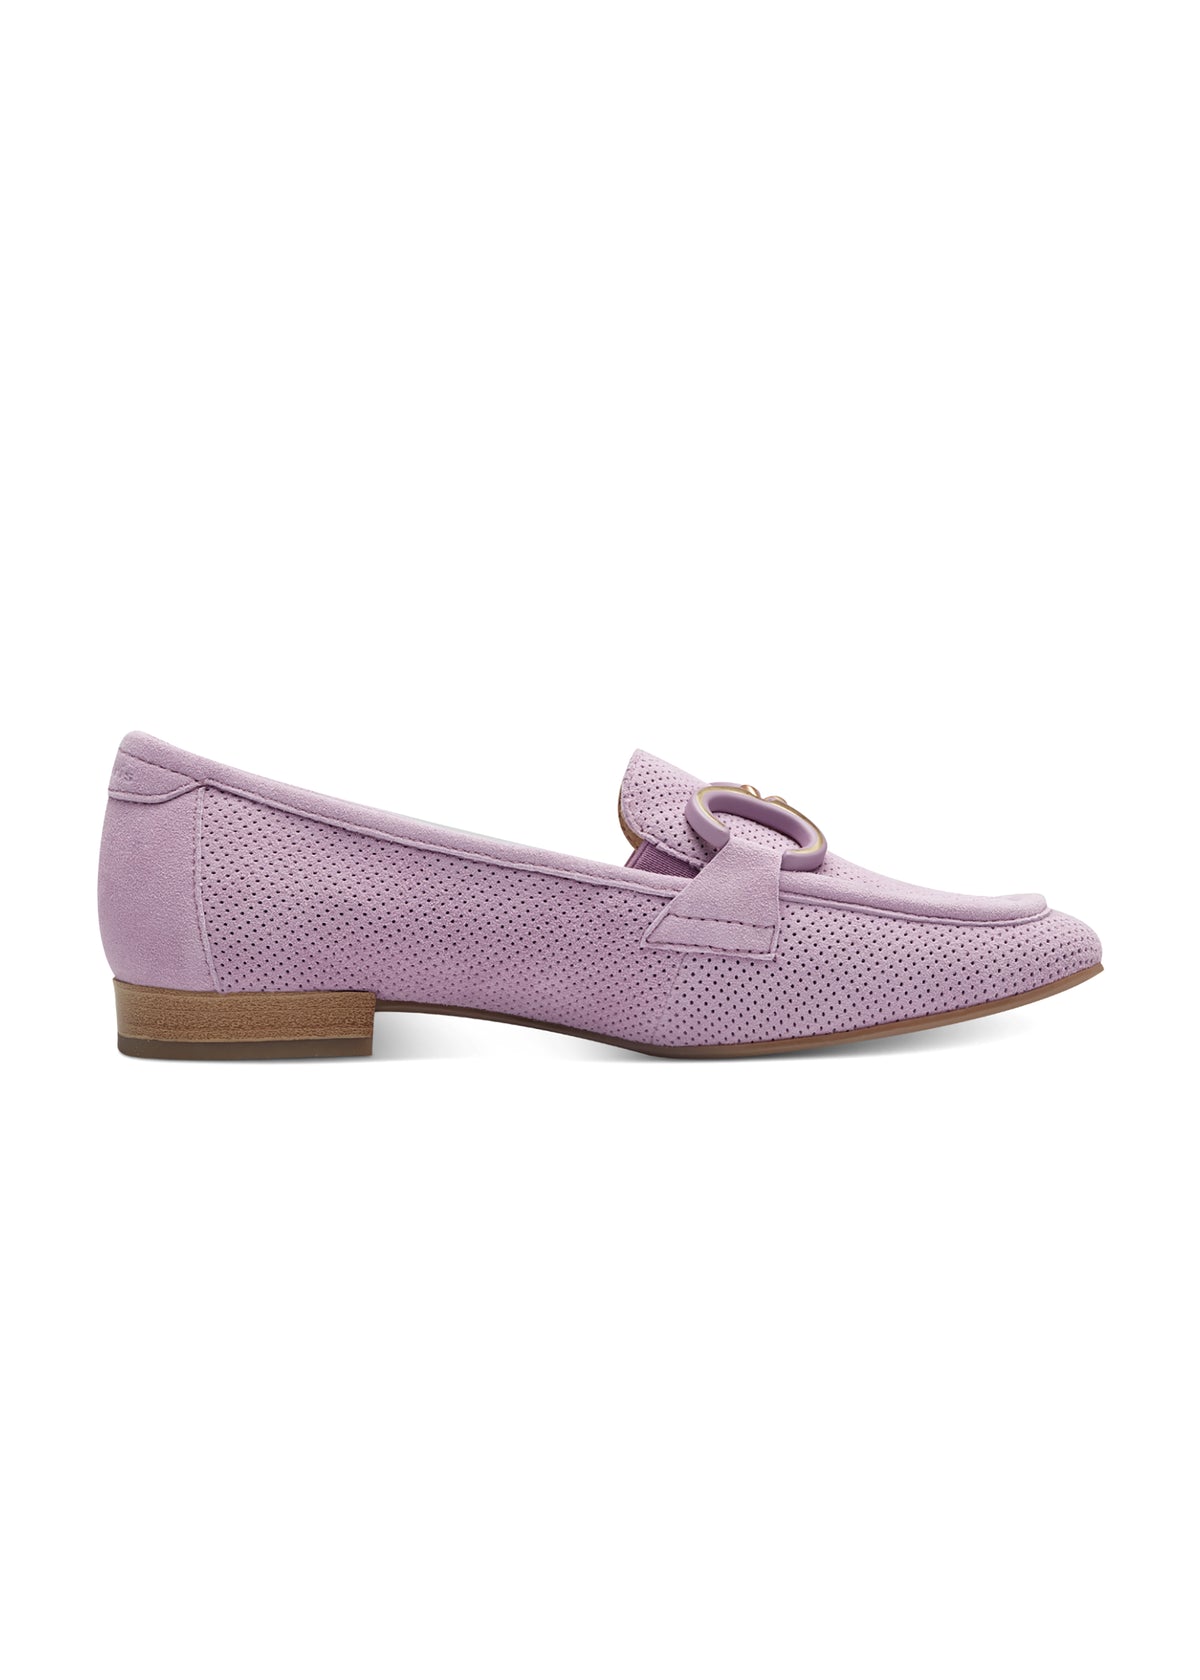 Loafers - light purple perforated leather, buckle decoration